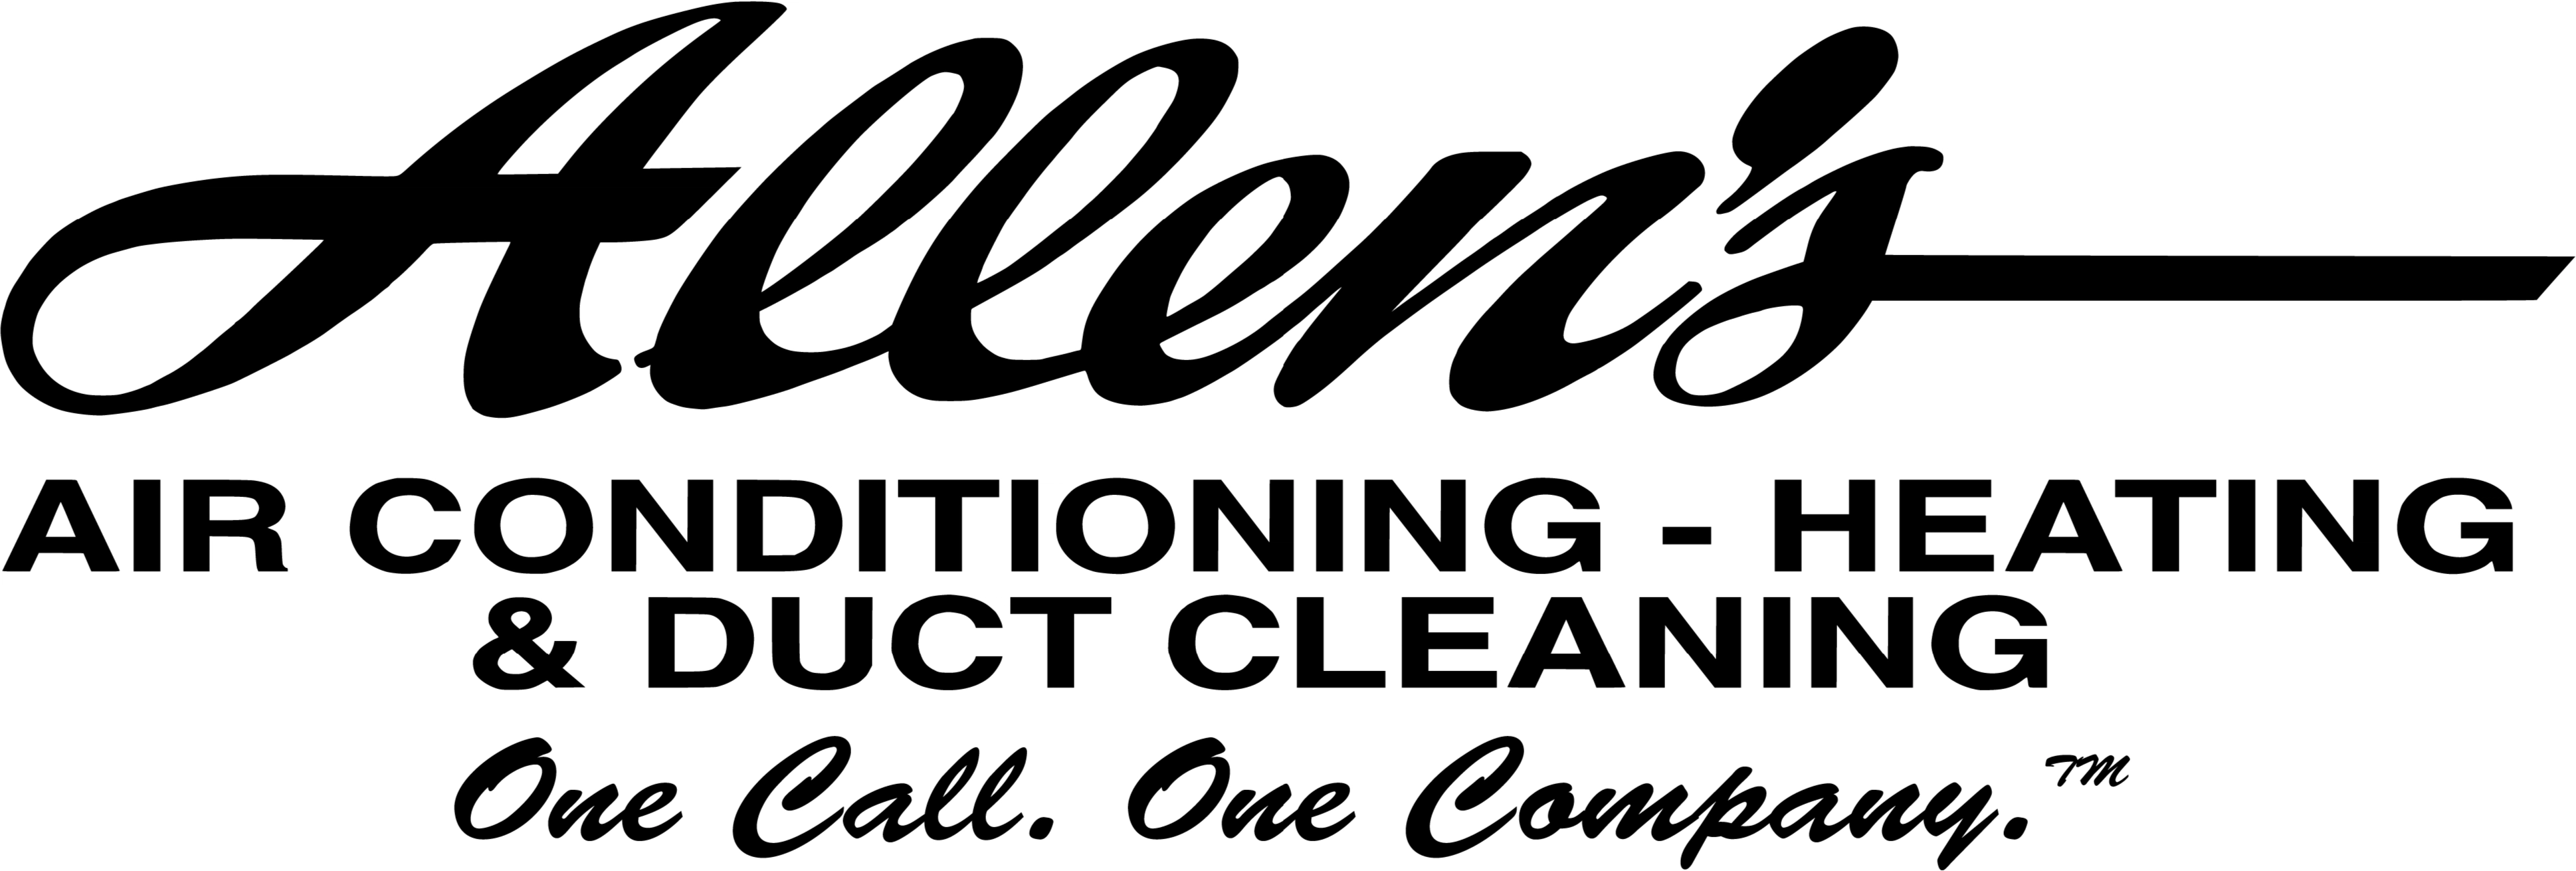 Allen's Air Conditioning Heating & Duct Cleaning Logo